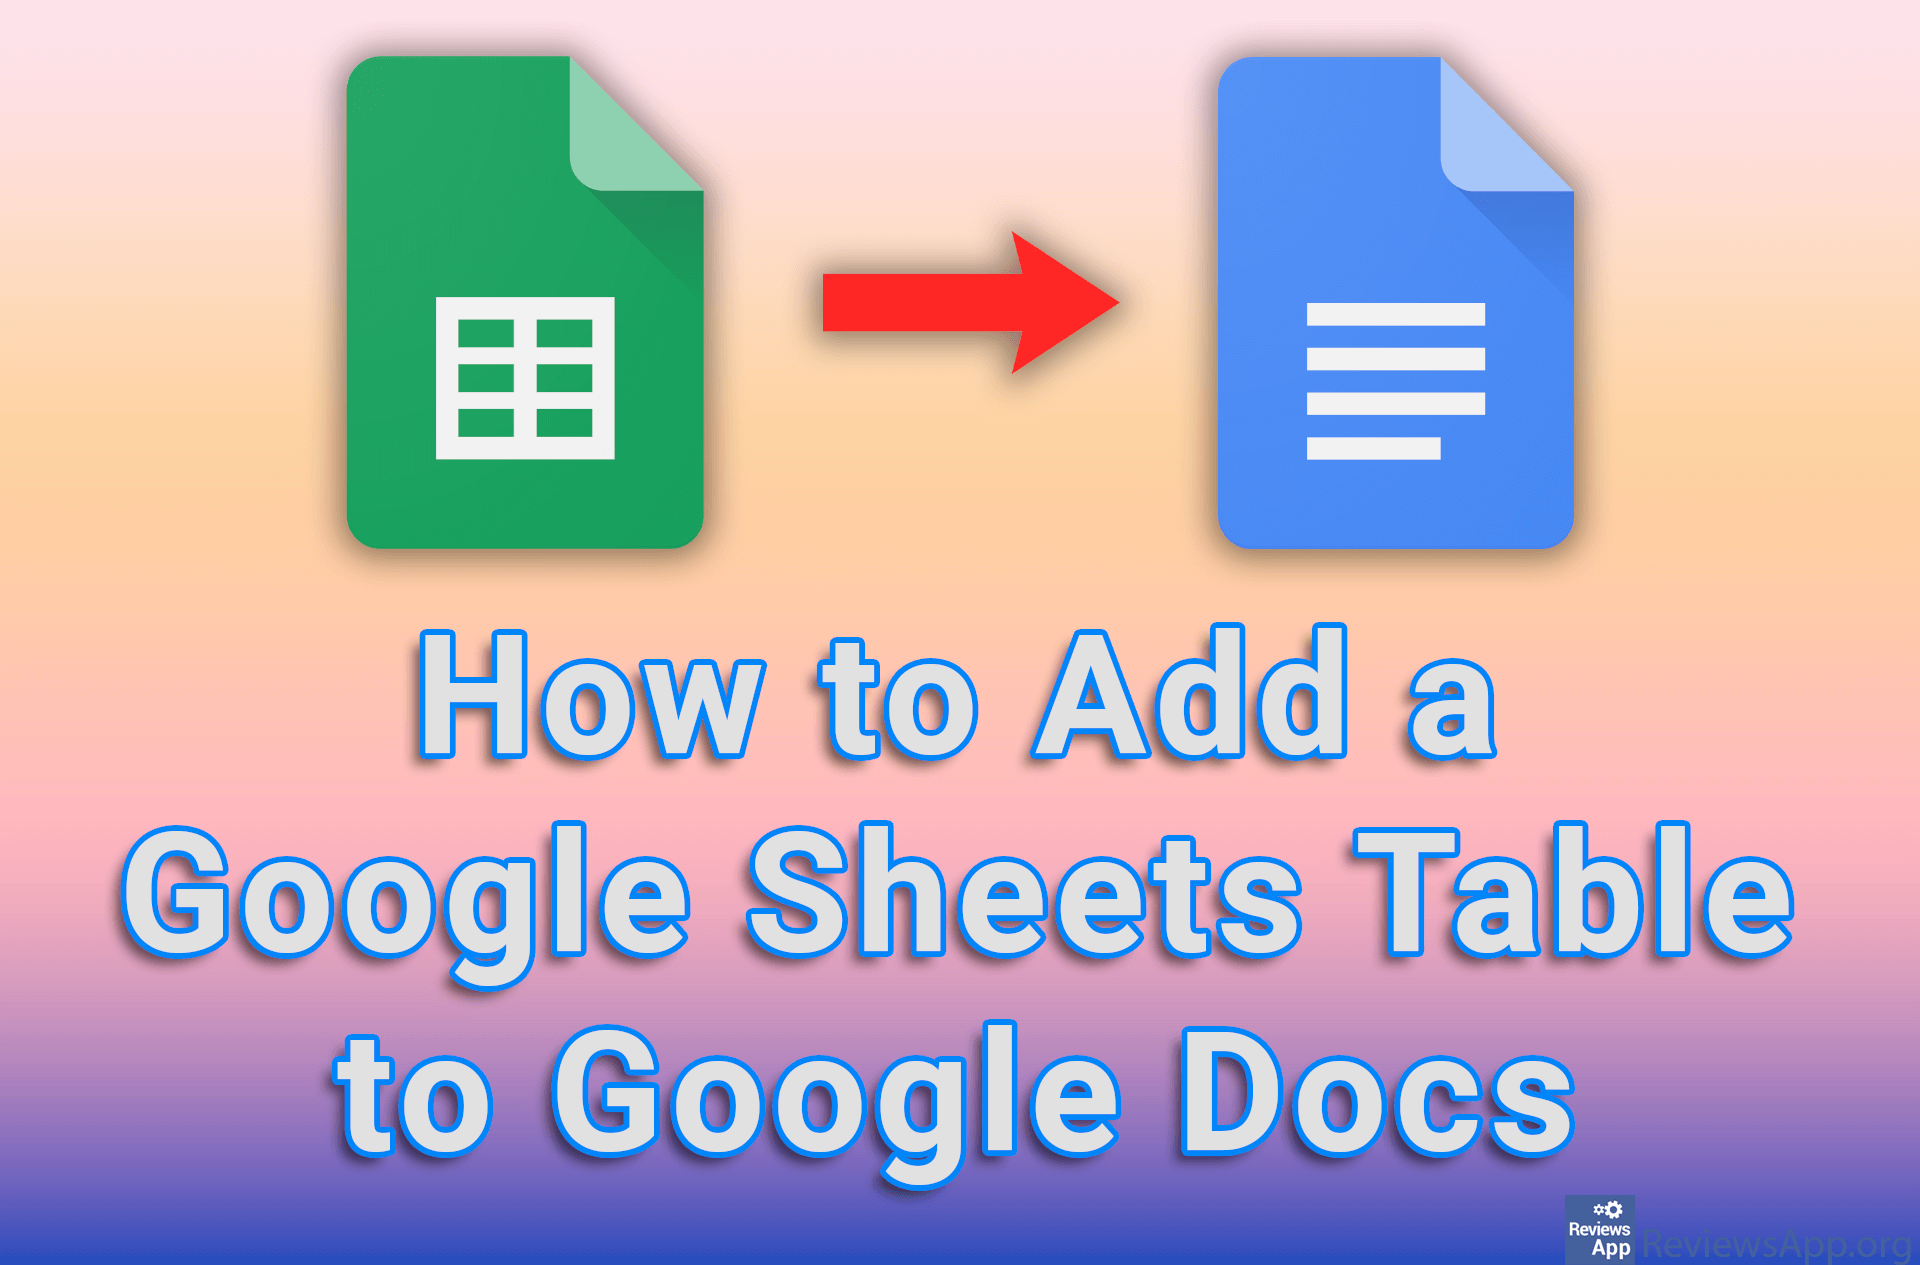 How to Add a Google Sheets Table to Google Docs